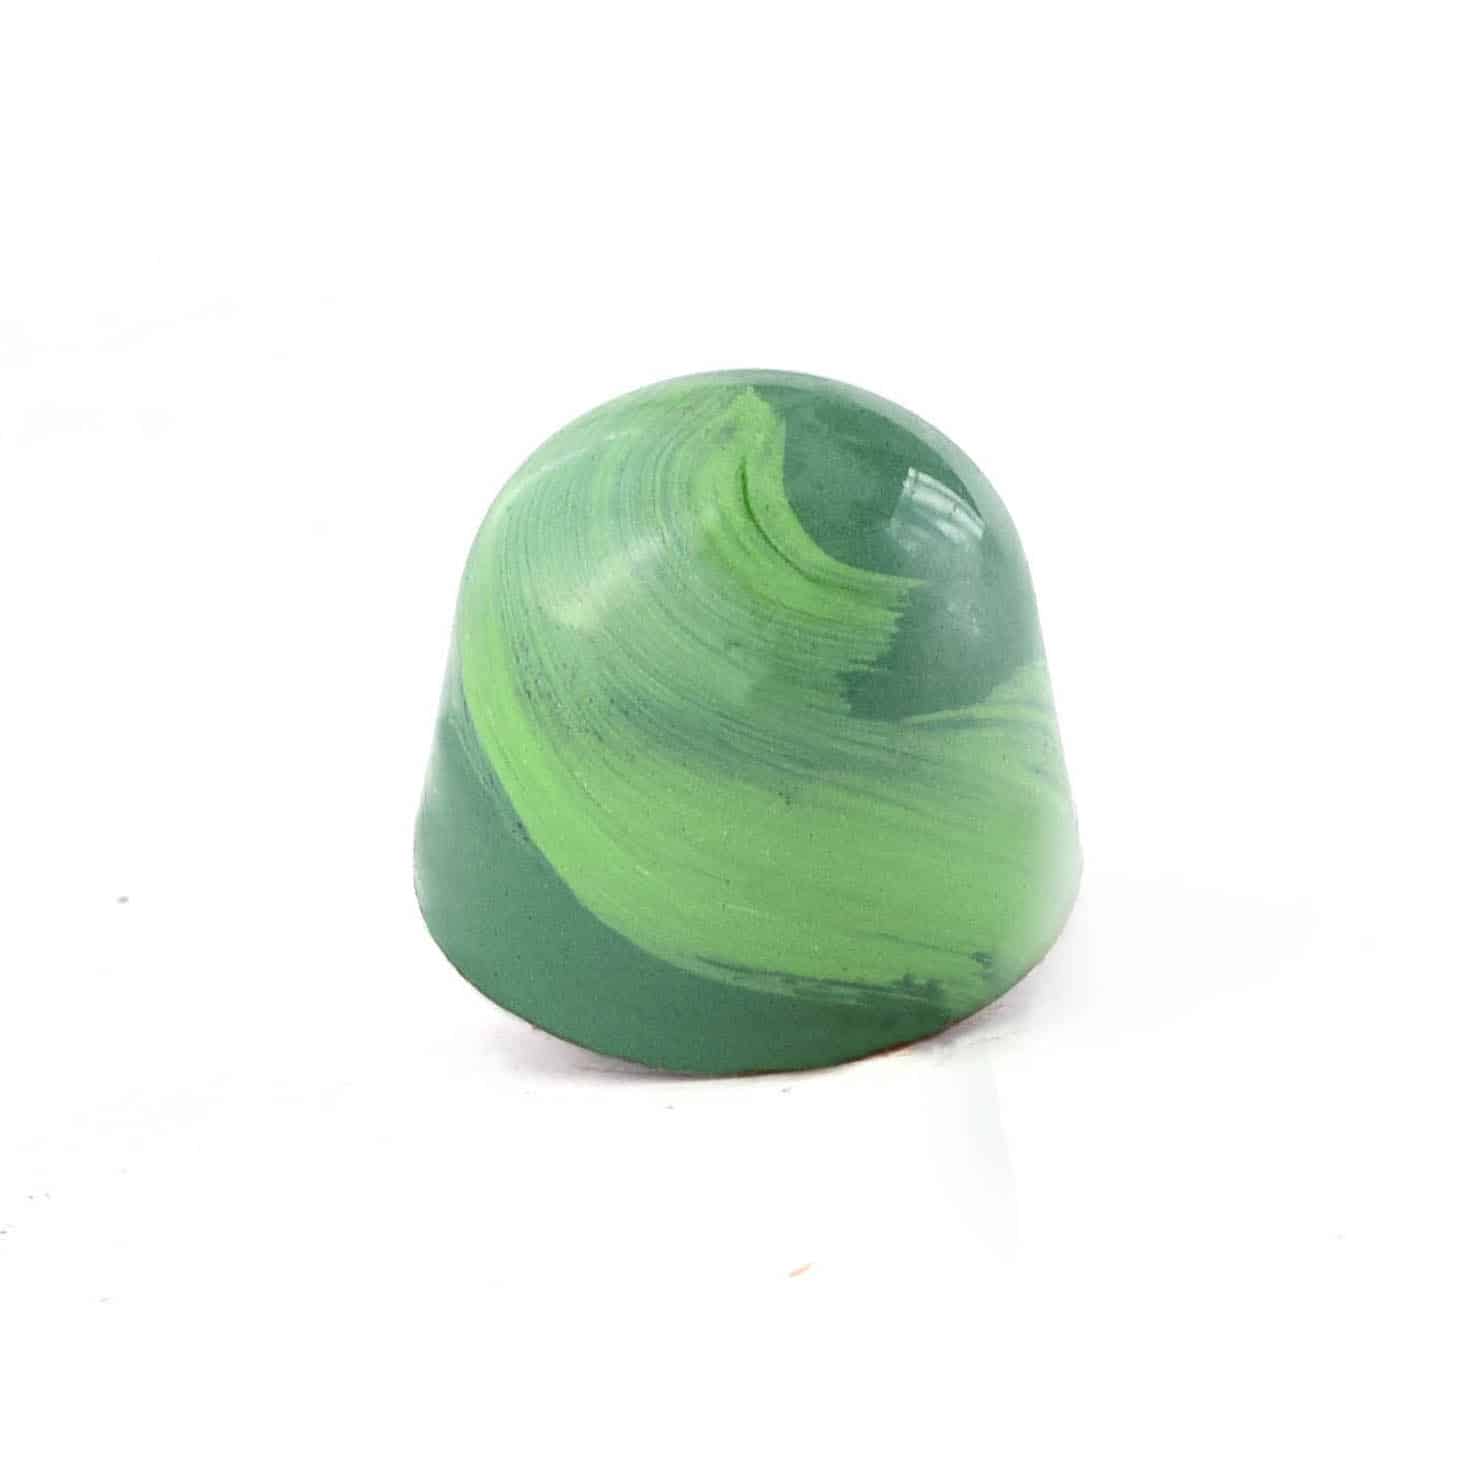 Side view of a green gourmet chocolate truffle with a lighter green brush stroke; truffle tastes like mint